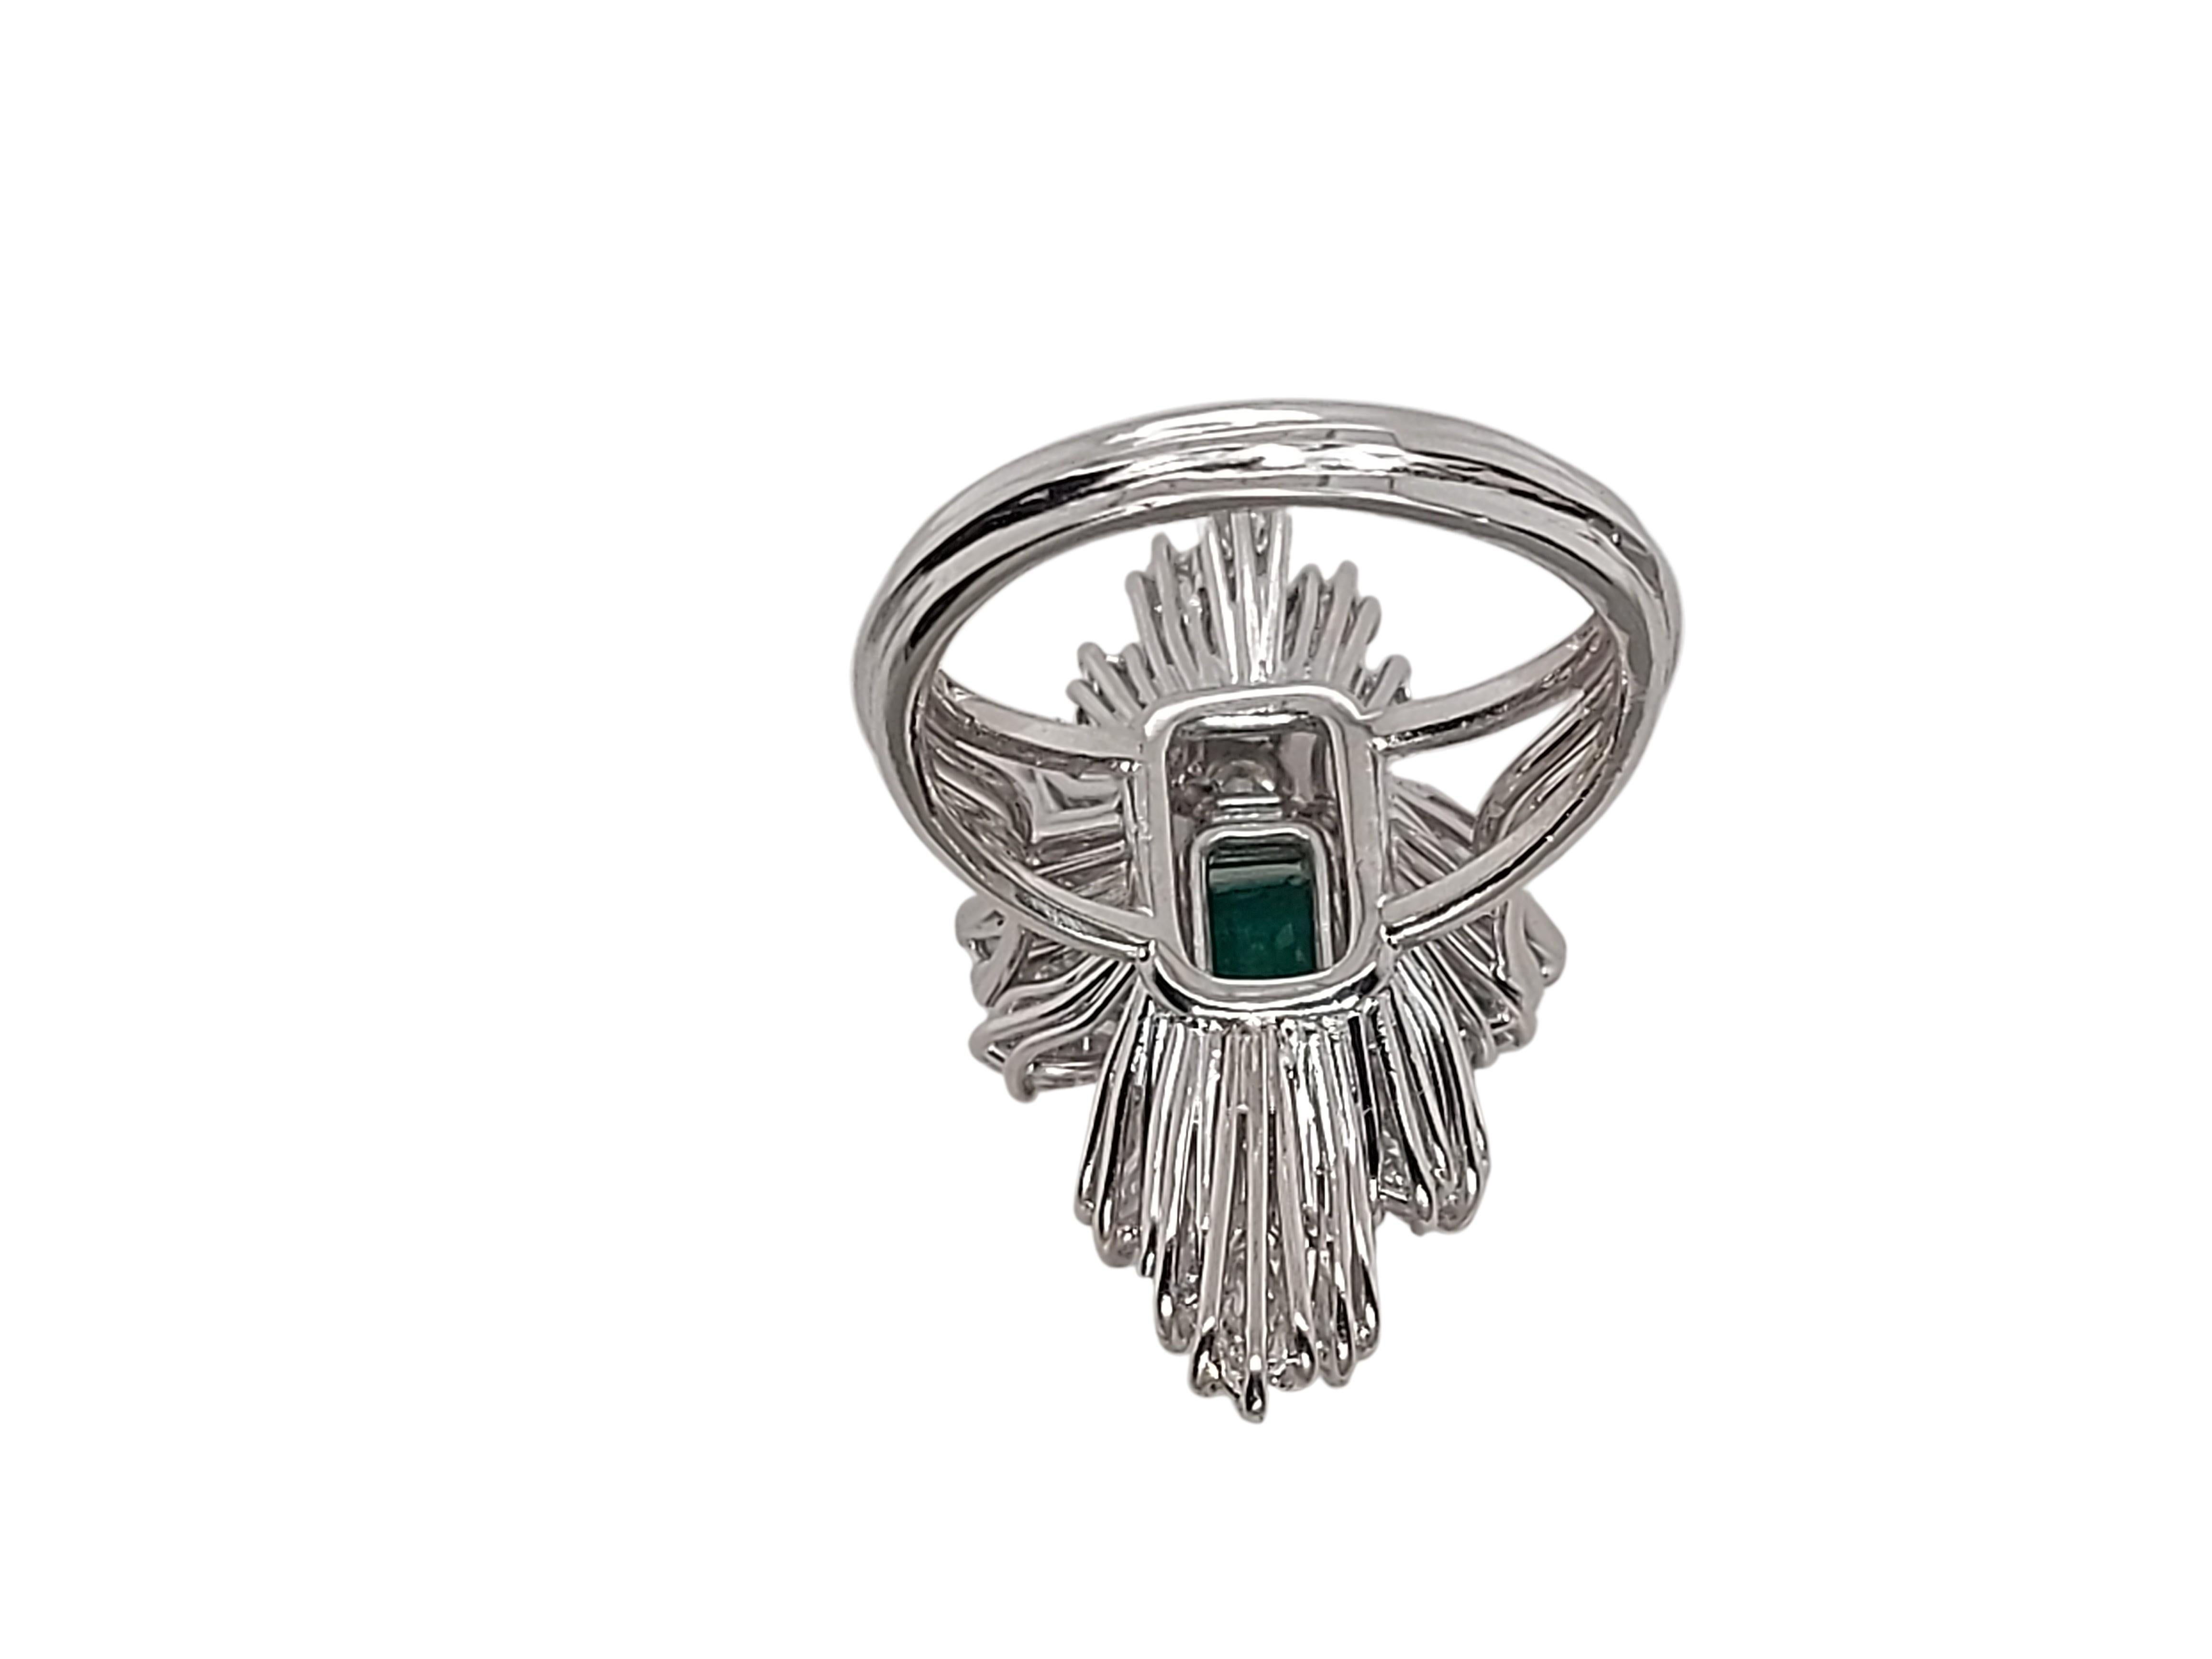 18kt White Gold Ring with 1.49 Ct Emerald Stone Surrounded by Diamonds For Sale 3